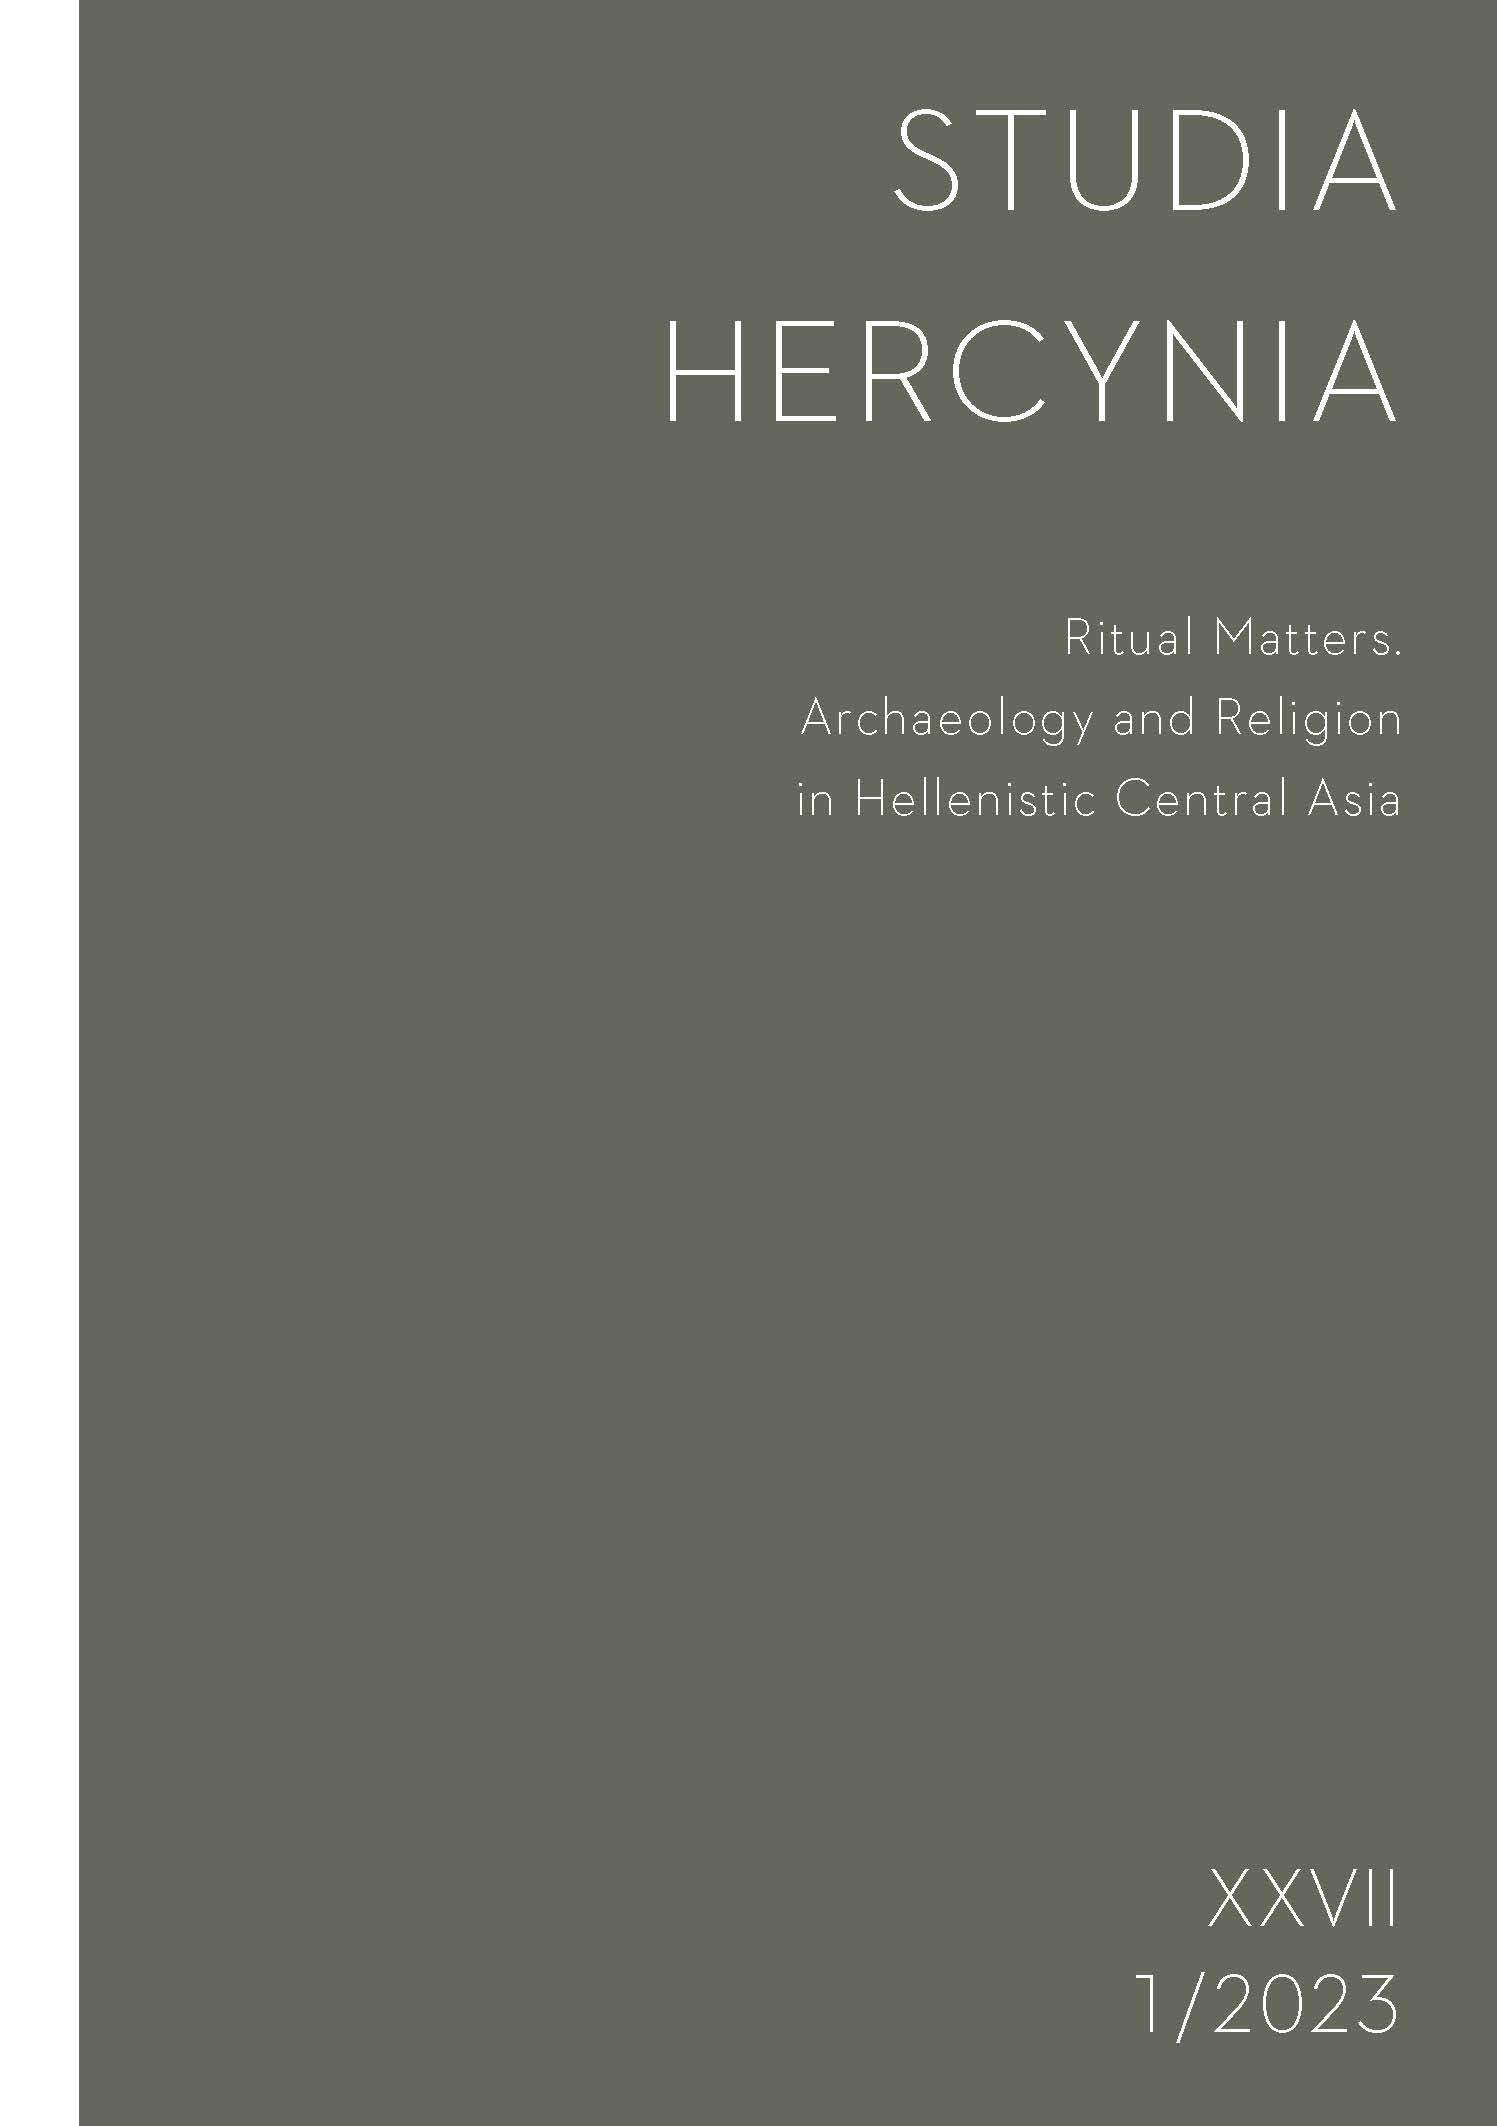 Studia Hercynia 27/1, 2023 – Ritual Matters. Archaeology and Religion in Hellenistic Central Asia